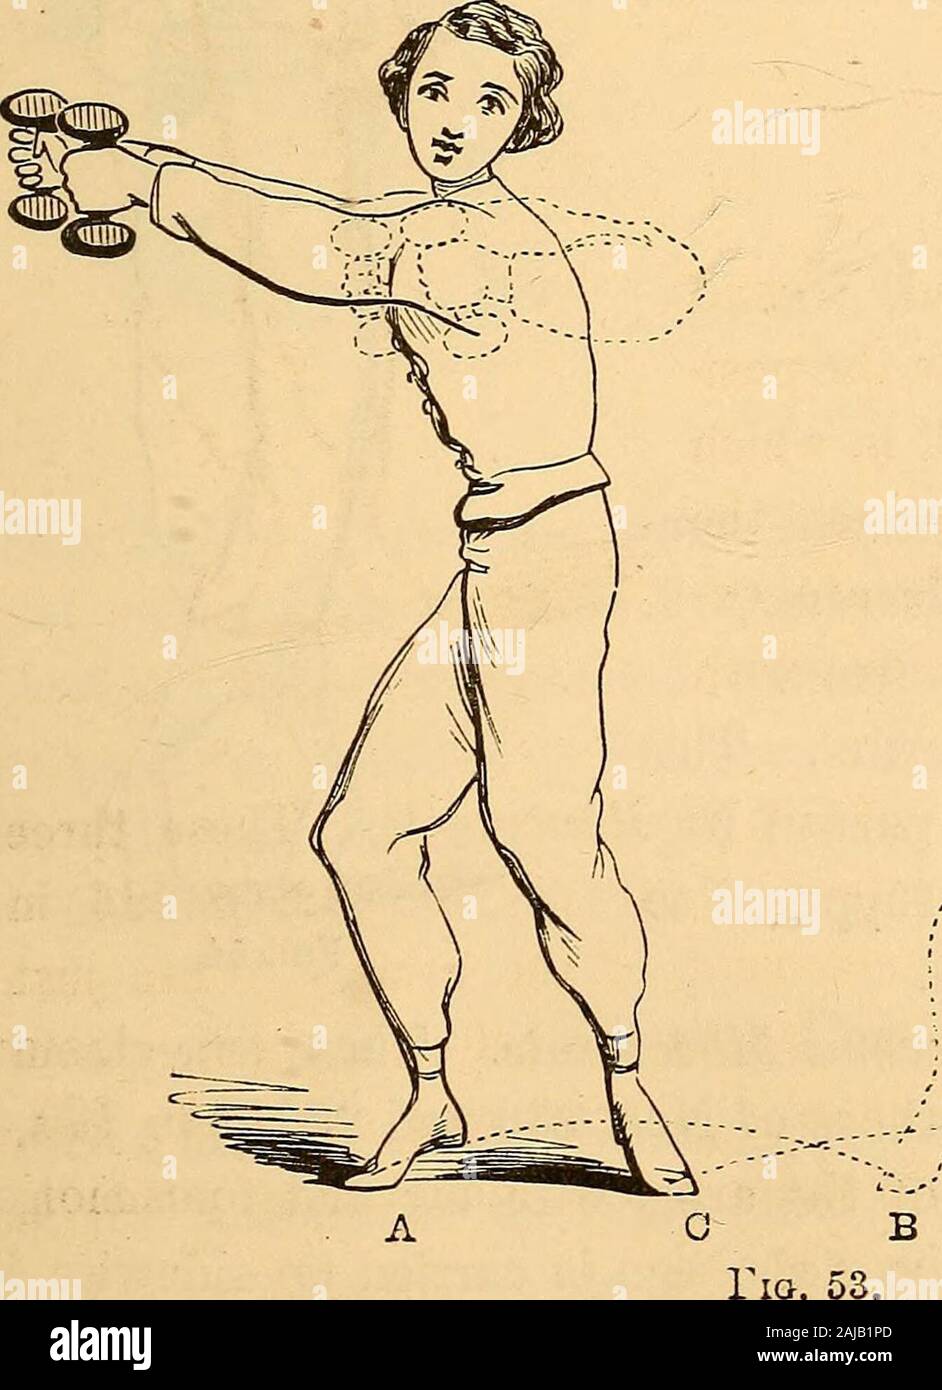 Hand-book of calisthenics and gymnastics : a complete drill-book for schools, families, and gymnasiums : with music to accompany the exercises . Fig. 52.. D .342 GYMNASTICS. commencing position at a and c four times ; then, at the command,Rear, turning to the rear in connection with each leap, he will leapto the left, crossing his legs and thus carrying the left foot forward,as in the dotted part of Fig. 53, and recover the commencing posi-tion four times ; and finally, at the command, Alternate, he willleap to the left and recover the commencing position eight times byalternation, first turni Stock Photo